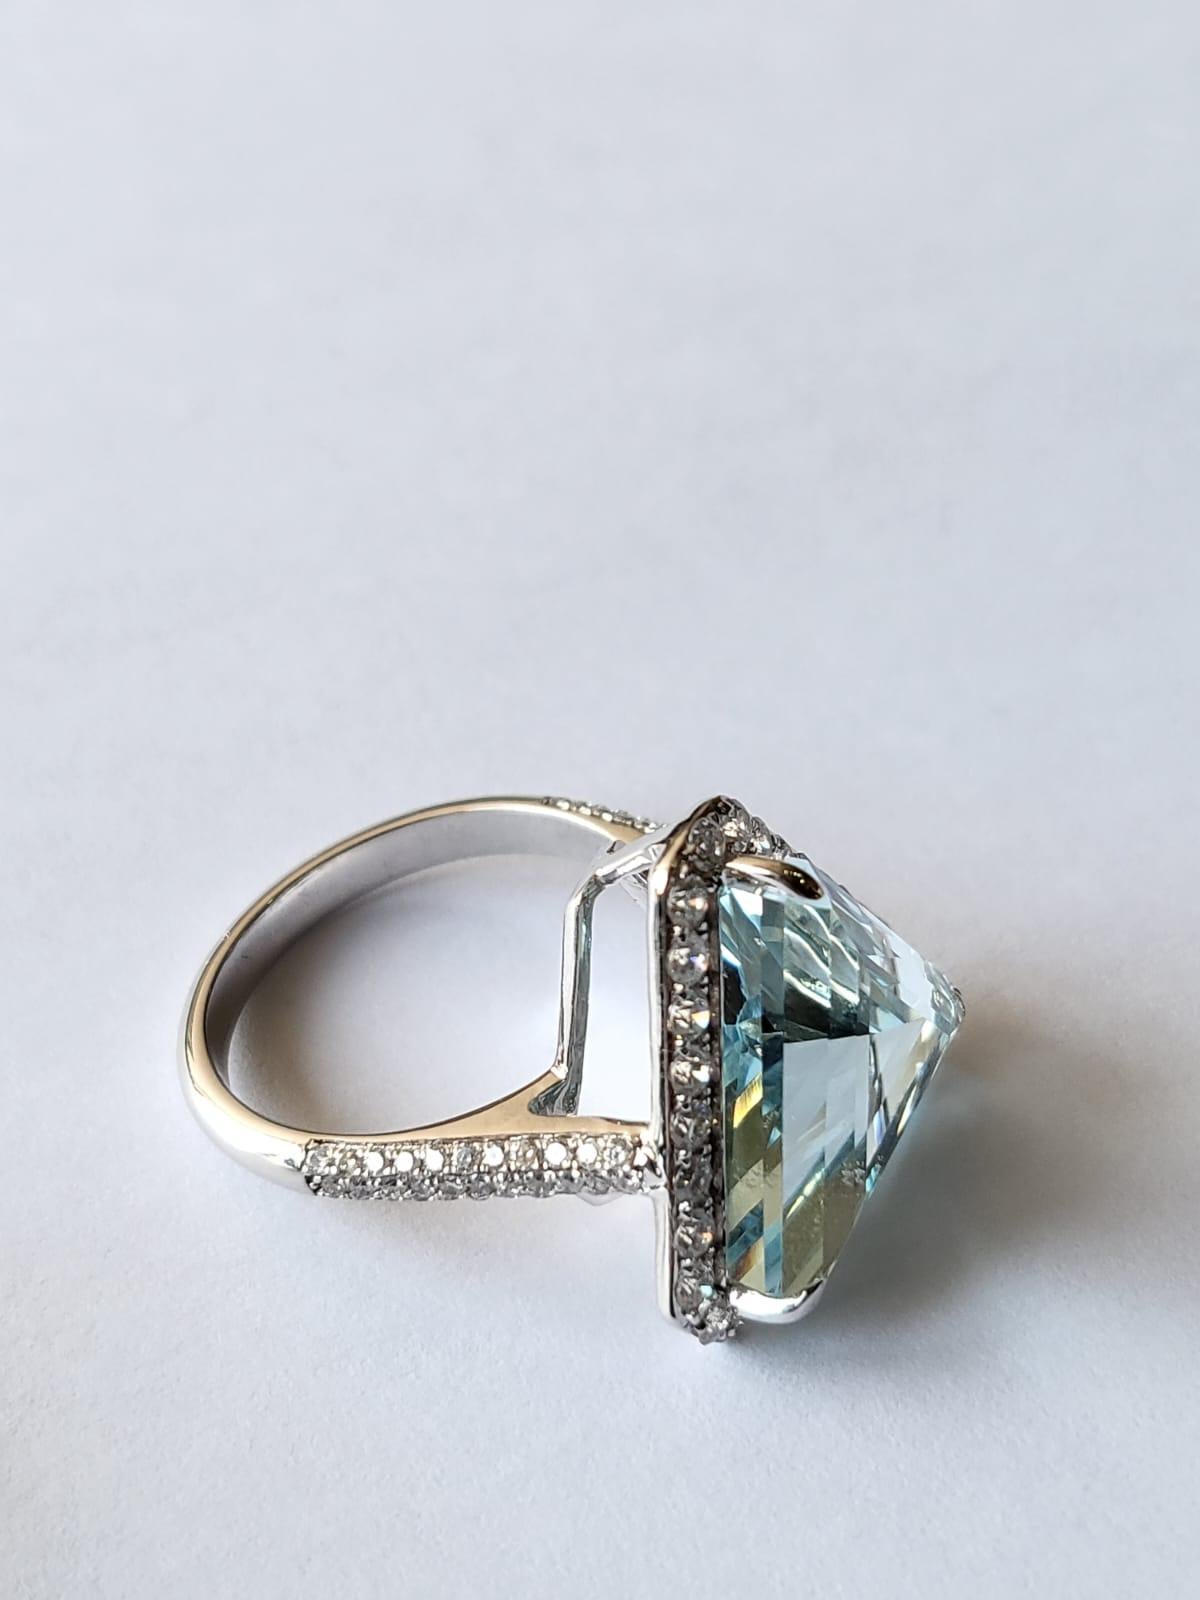 A very gorgeous and one of a kind, Aquamarine Engagement / Cocktail Ring set in 18K White Gold & Diamonds. The weight of the Trillion shaped Aquamarine is 8.90 carats. The weight of the Diamonds is 1.05 carats. Net Gold weight is 5.54 grams. The